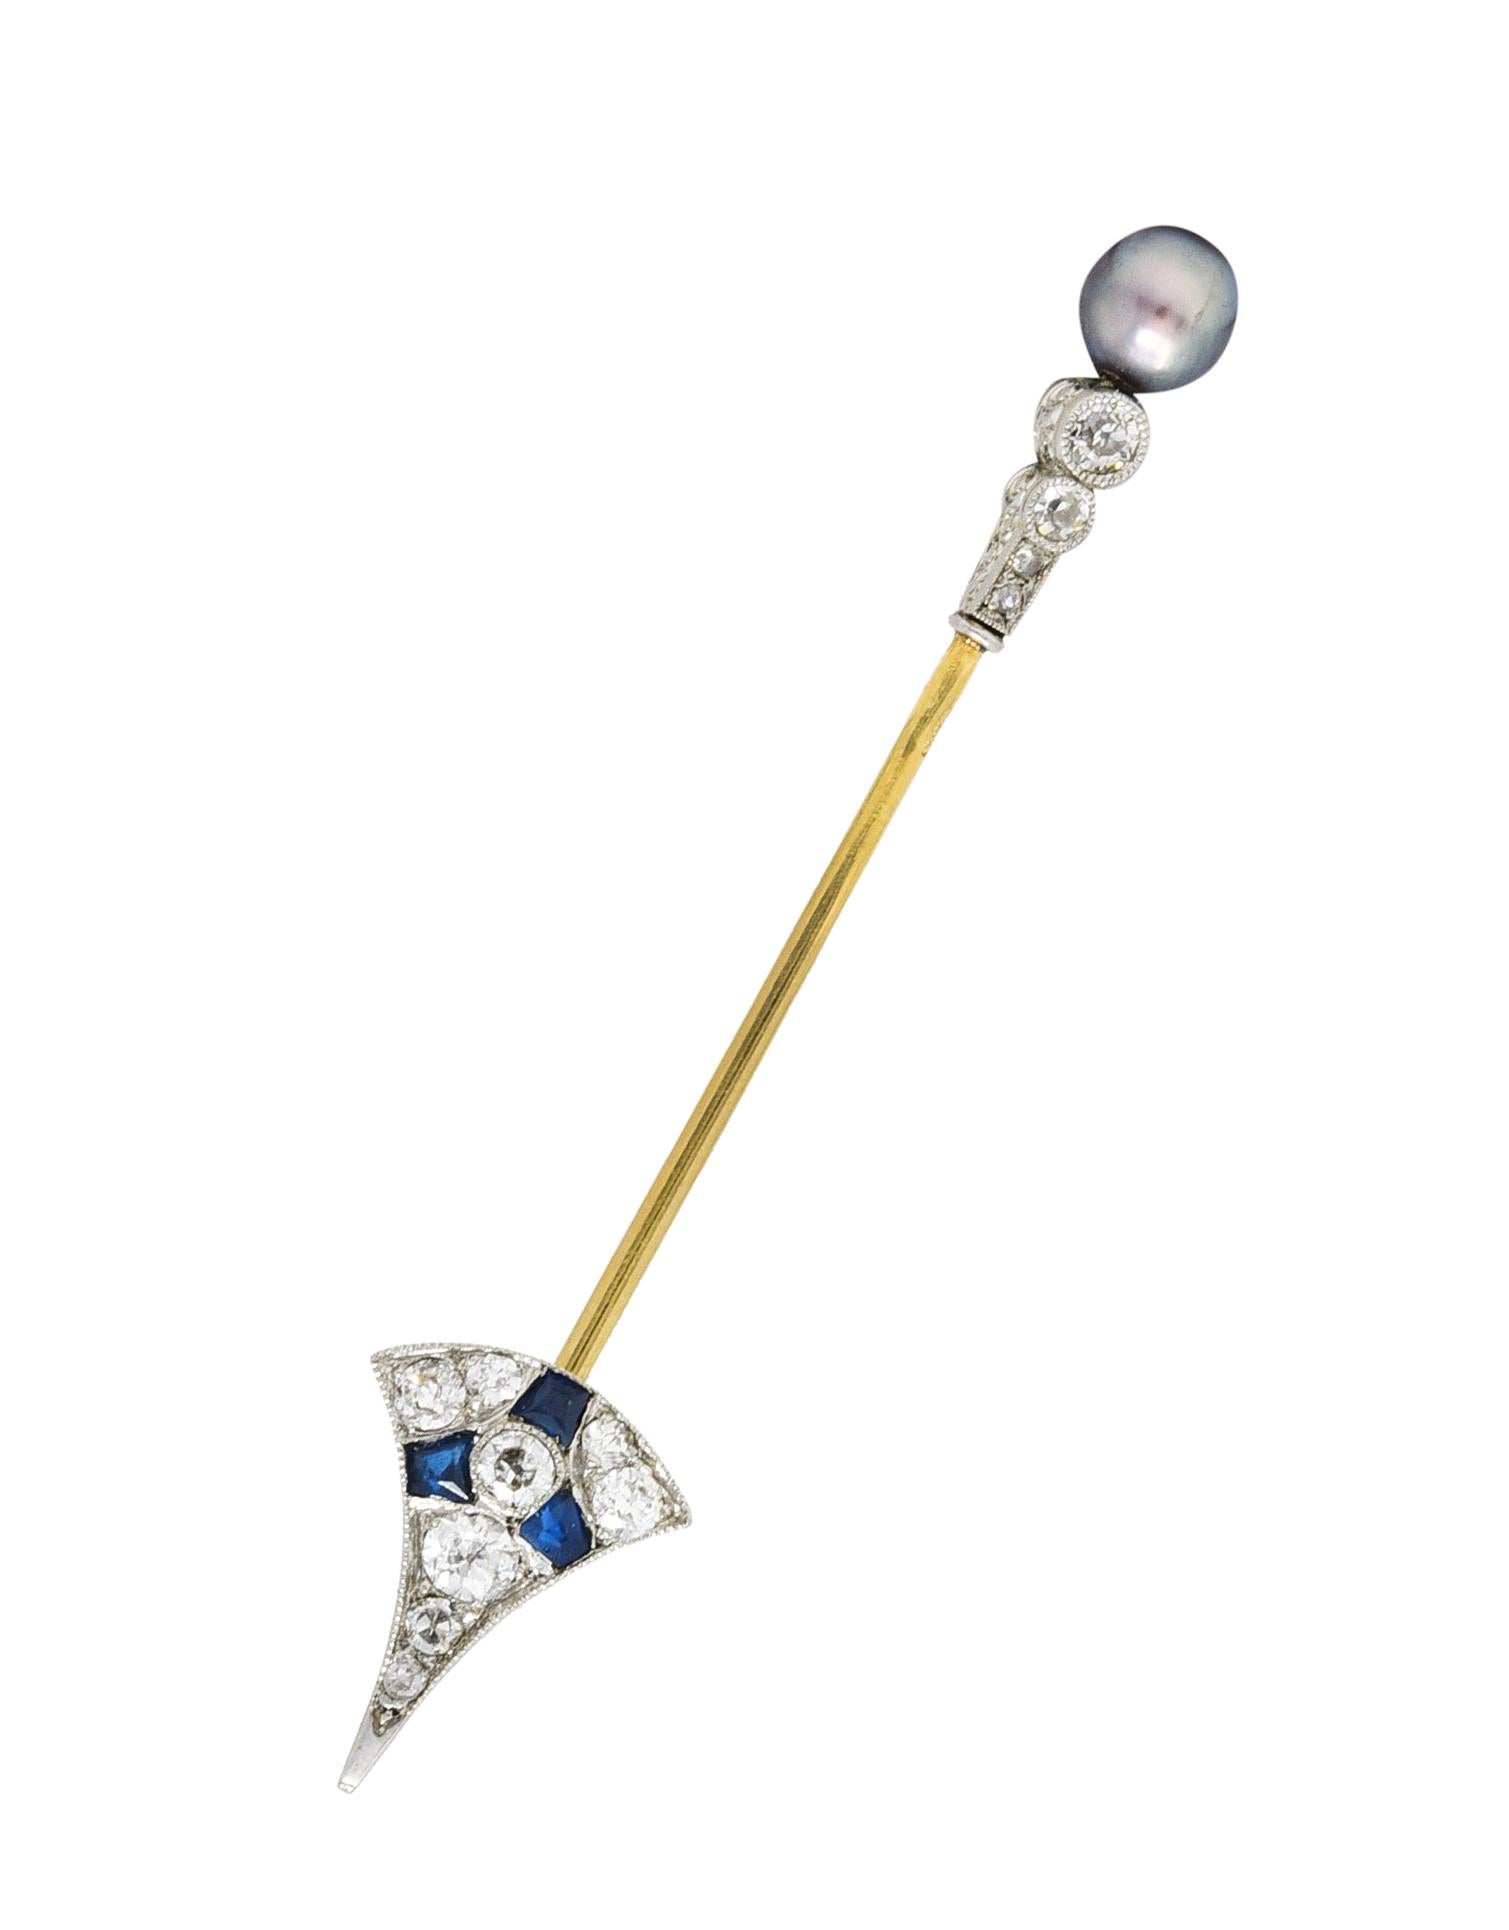 Arrow jabot bar brooch is designed as a gemmed arrowhead and stylized gemstone fletching. Arrowhead is pavé set with old European cut diamonds and a triad of calibrè cut sapphire. Fletching is multi-sided and exhibits profile engraving, calibré cut